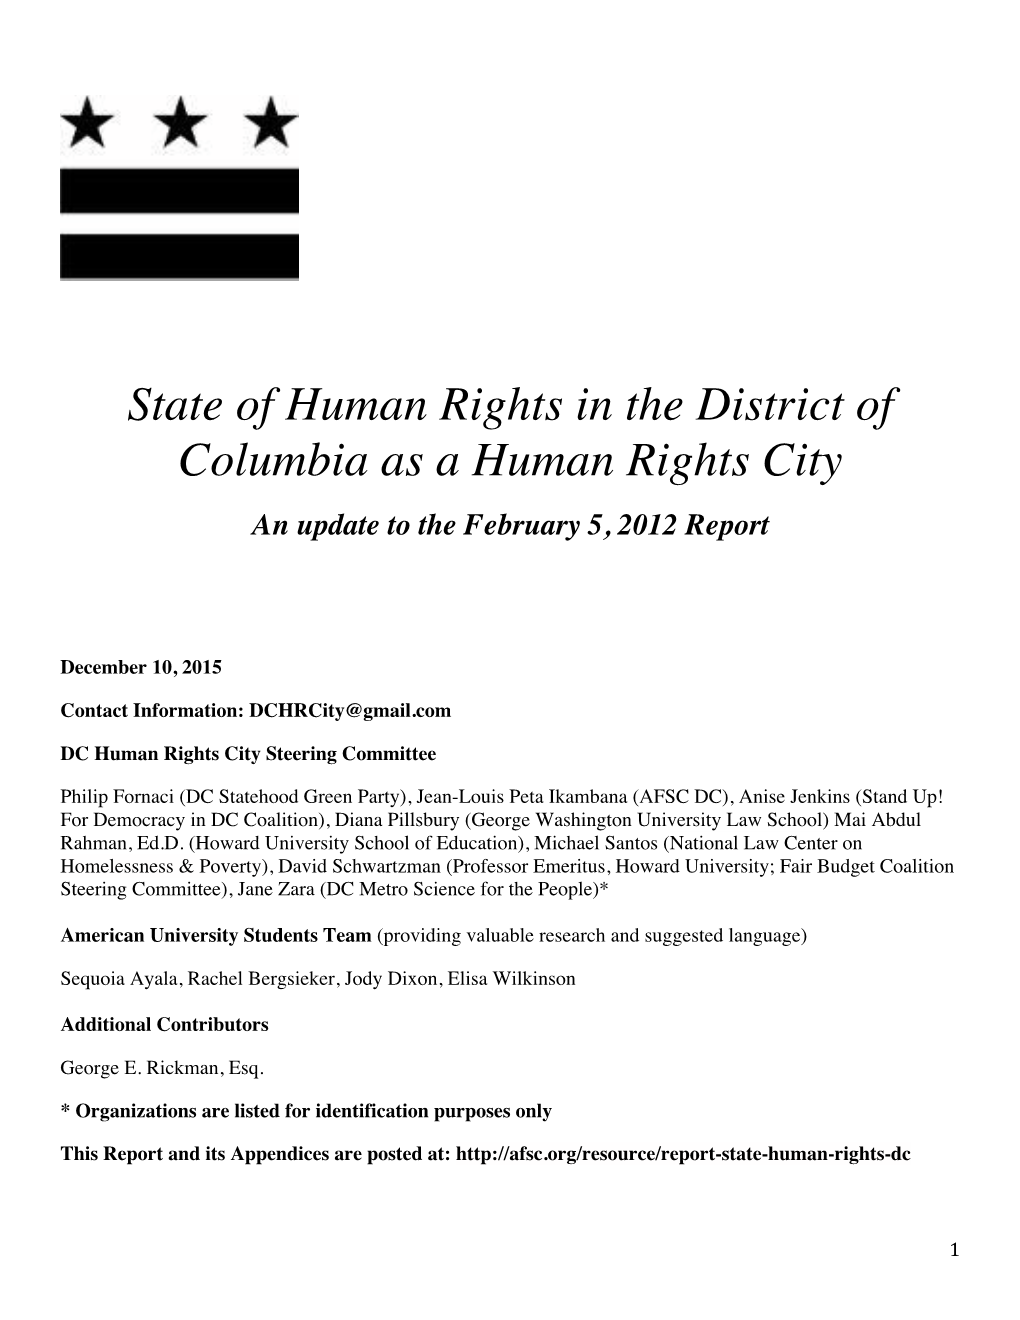 State of Human Rights in the District of Columbia As a Human Rights City an Update to the February 5, 2012 Report